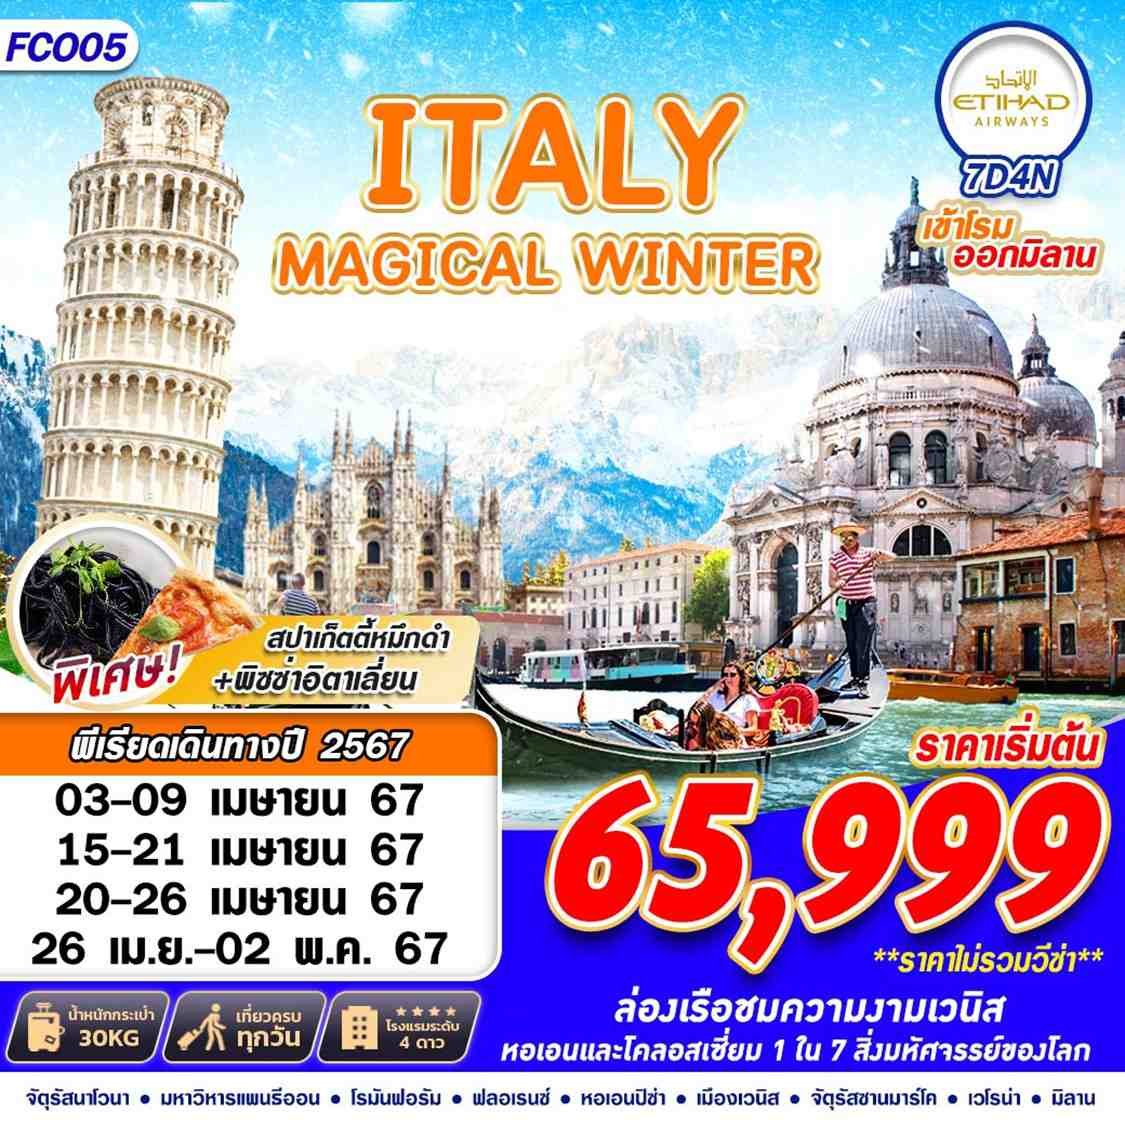 FCO05 ITALY MAGICAL WINTER 7D4N BY EY